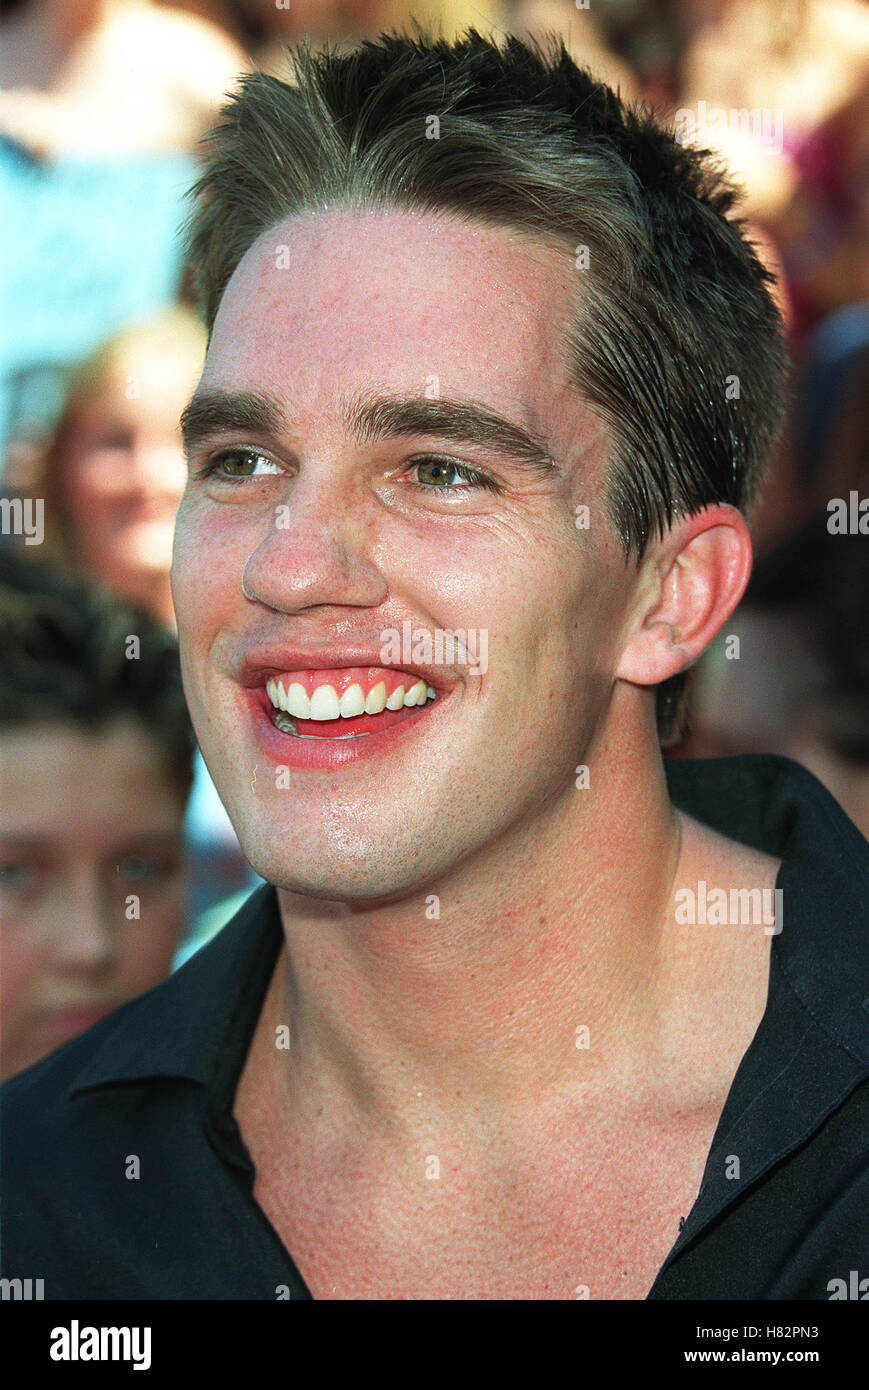 ROSS PATTERSON TEEN CHOICE AWARDS HOLLYWOOD LOS ANGELES USA 12 August 2001 Stock Photo